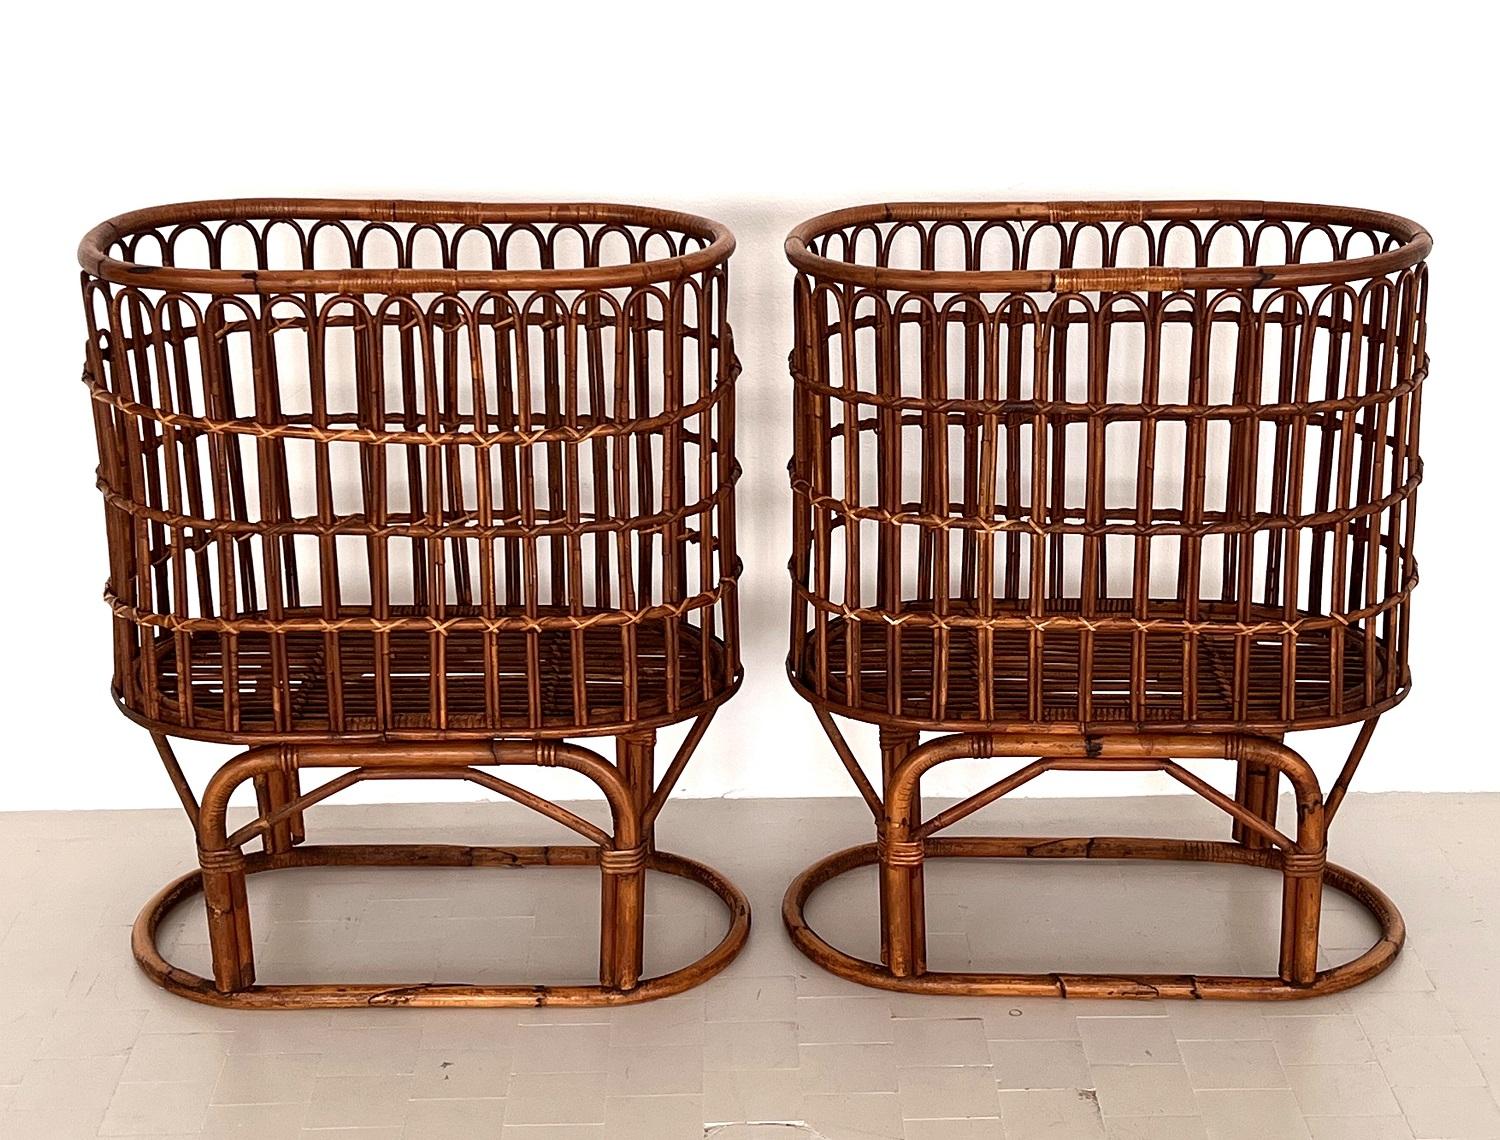 A pair of beautiful, unusual and large standing baskets.
They were made in France from bamboo wood in the 1970s and 1980s.
They were originally used in a bakery as baguette baskets, but can of course be used in many different ways.
The height of the